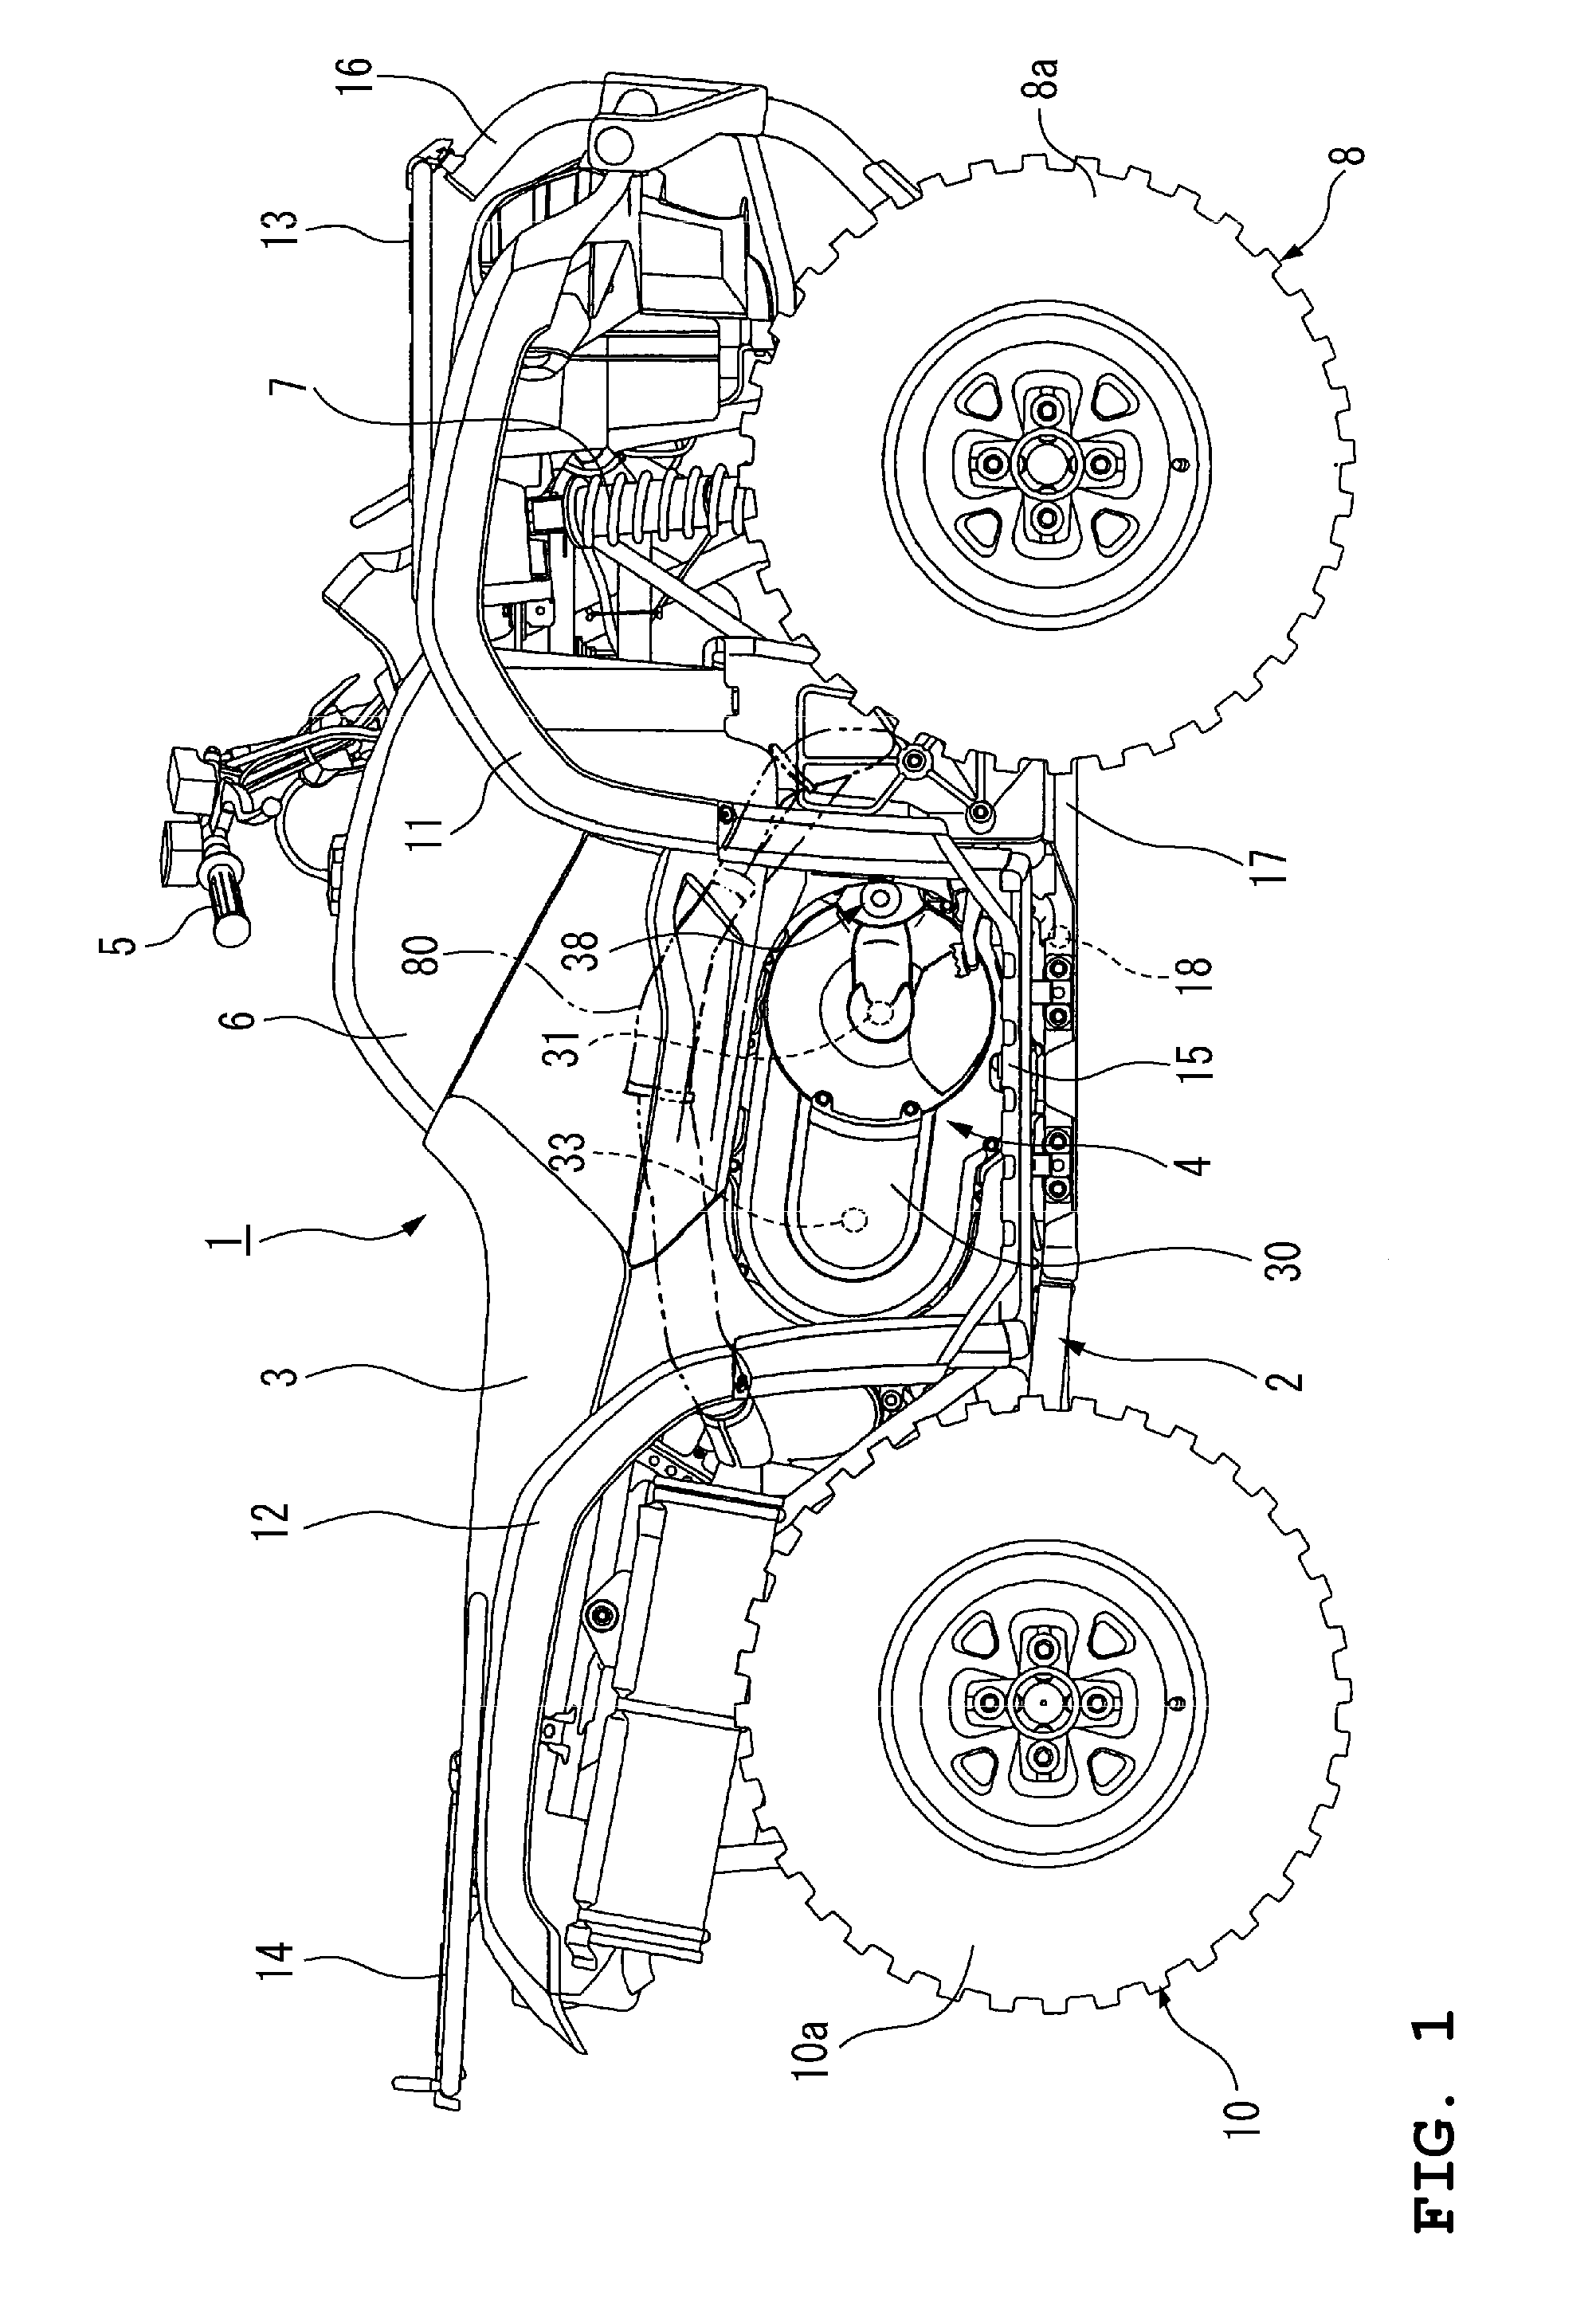 Straddle-type vehicle and power unit